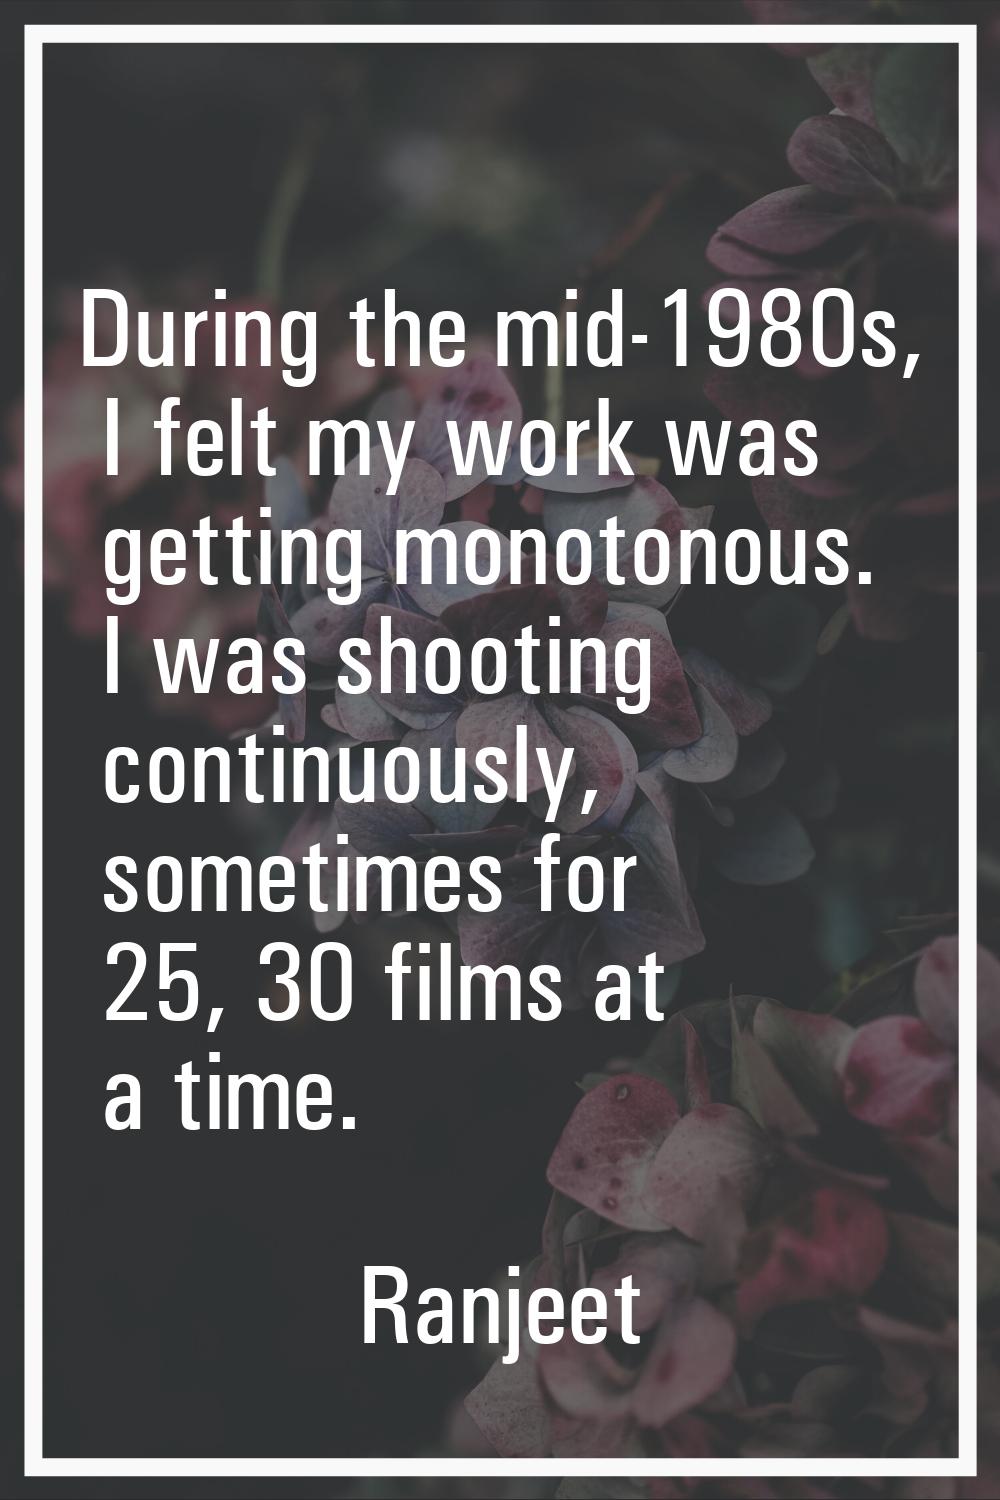 During the mid-1980s, I felt my work was getting monotonous. I was shooting continuously, sometimes